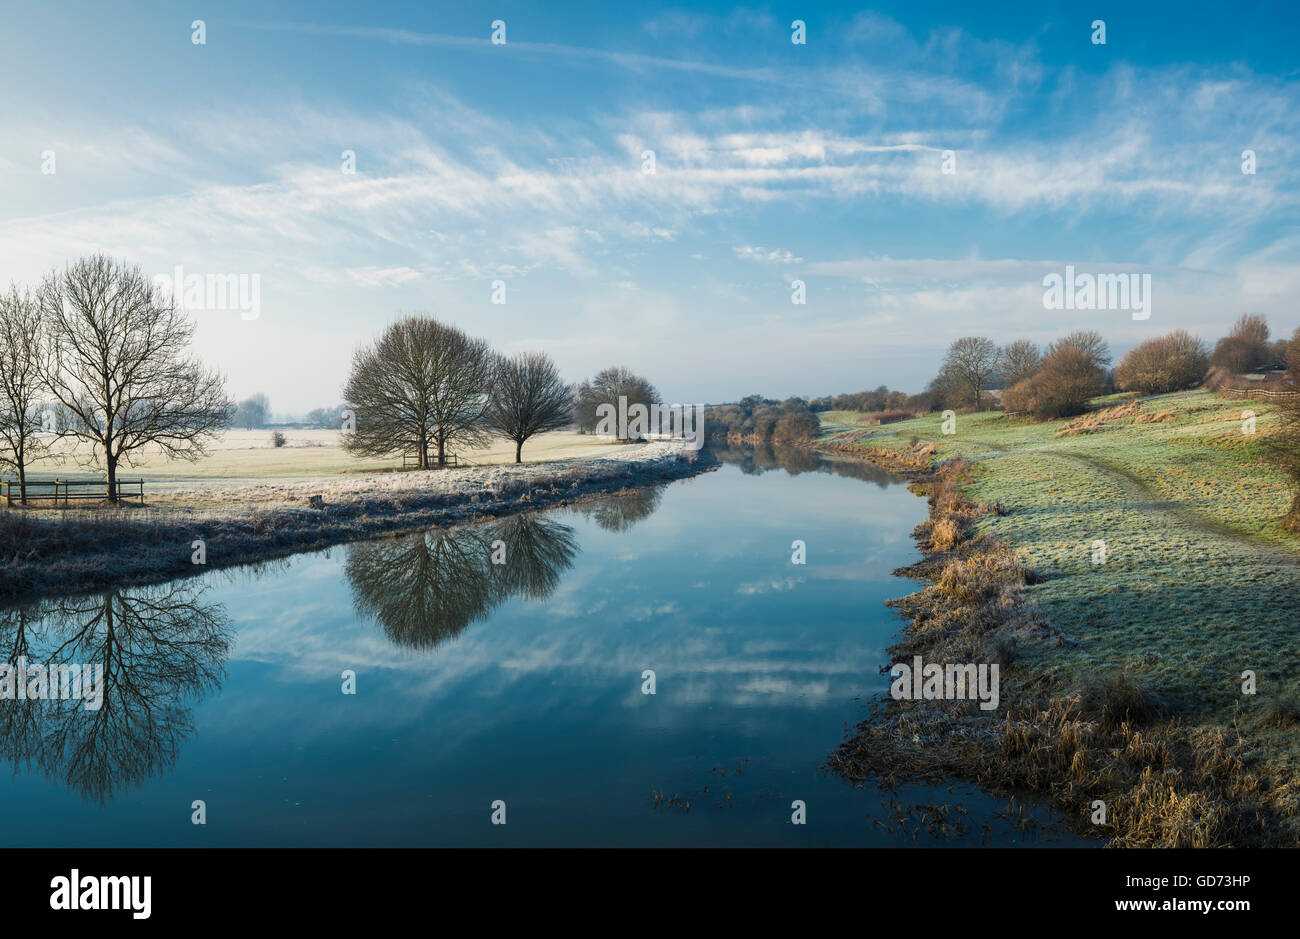 The River Nene on an icy cold January day, Peterborough, Cambridgeshire, England Stock Photo